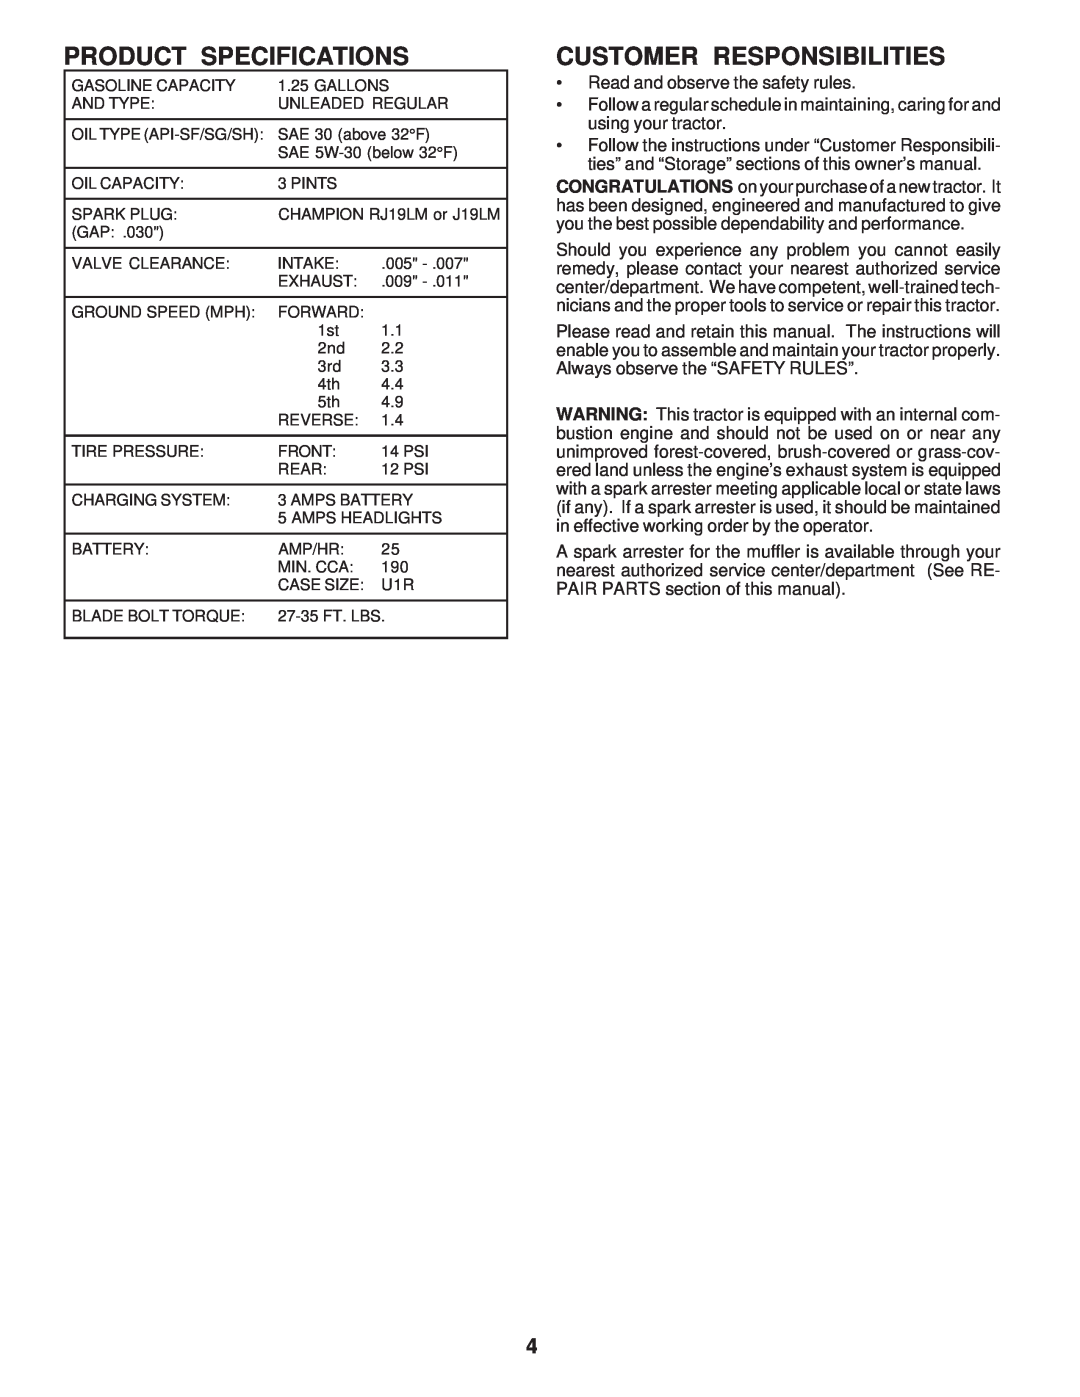 Weed Eater WE12542F, 174193 owner manual Product Specifications, Customer Responsibilities 